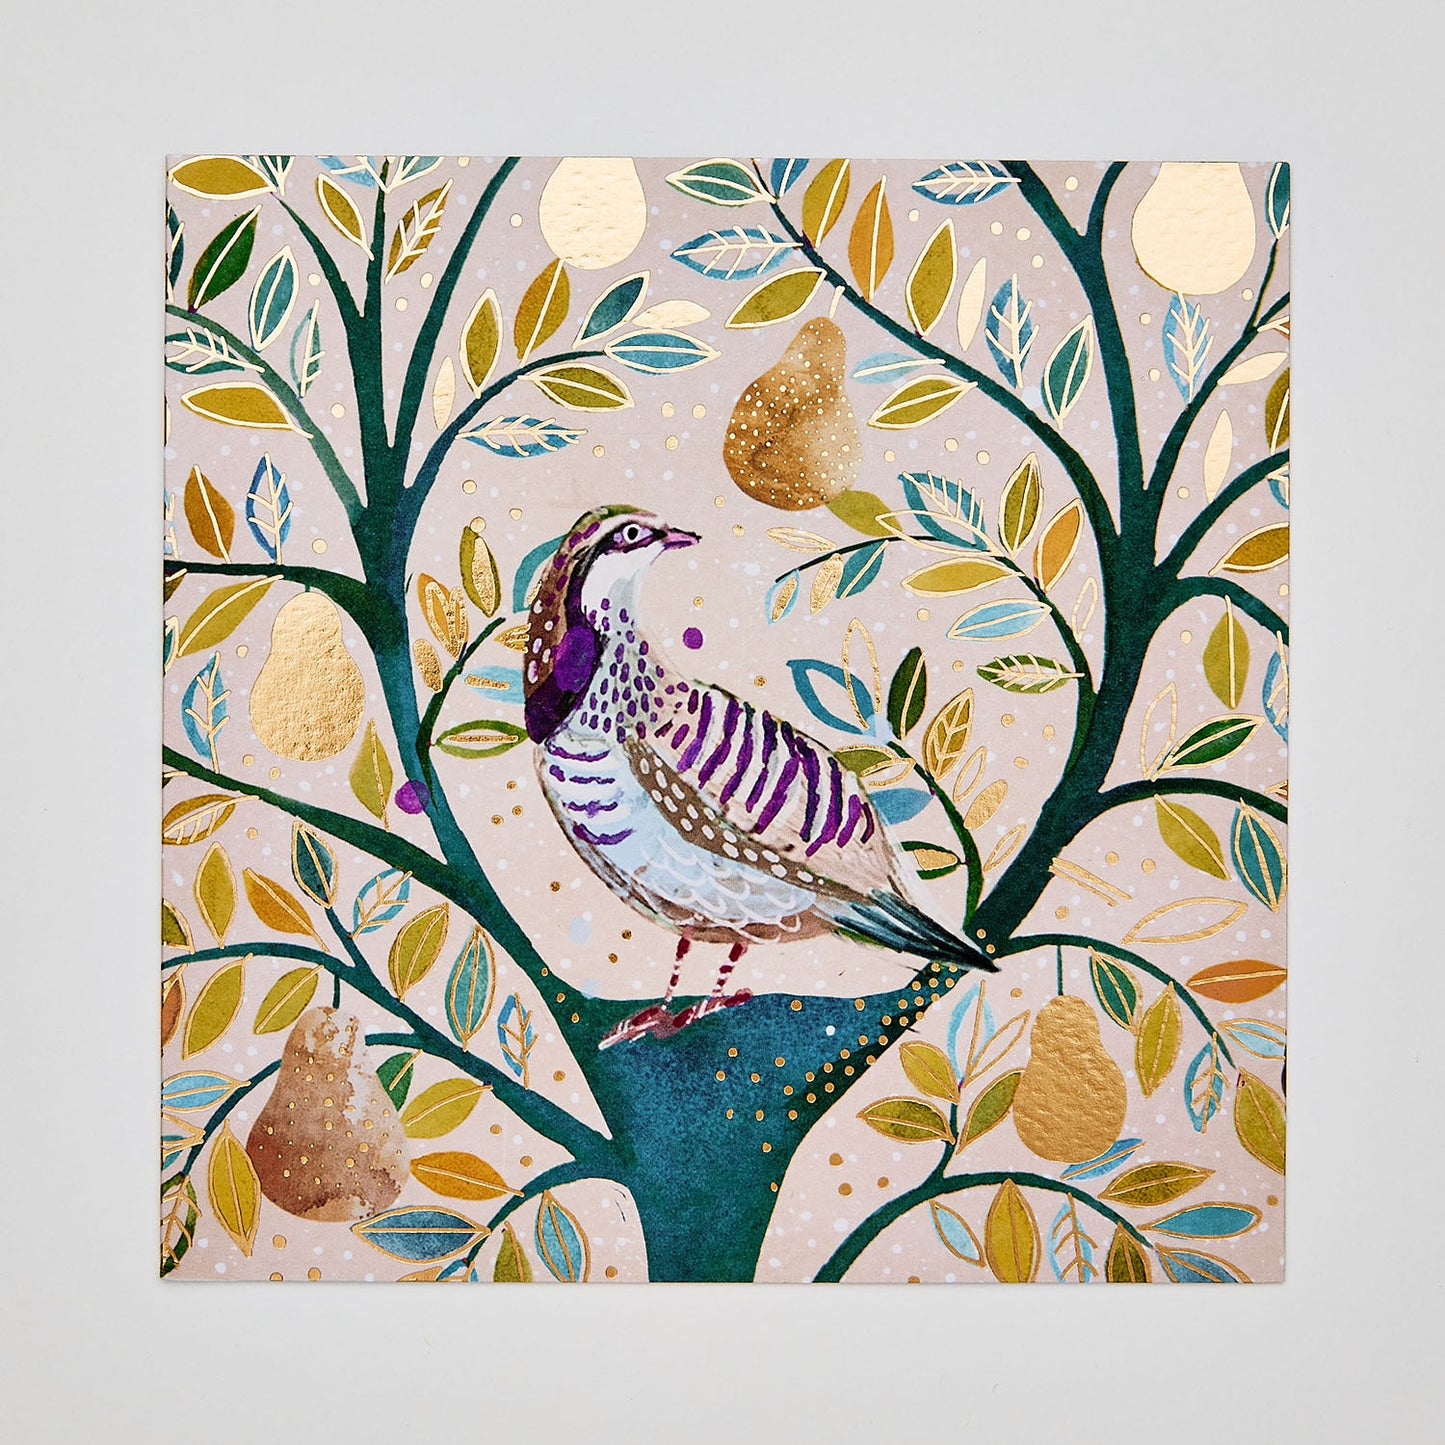 Flat lay of christmas card depicting a pretty partridge in a pear tree with gold detailing